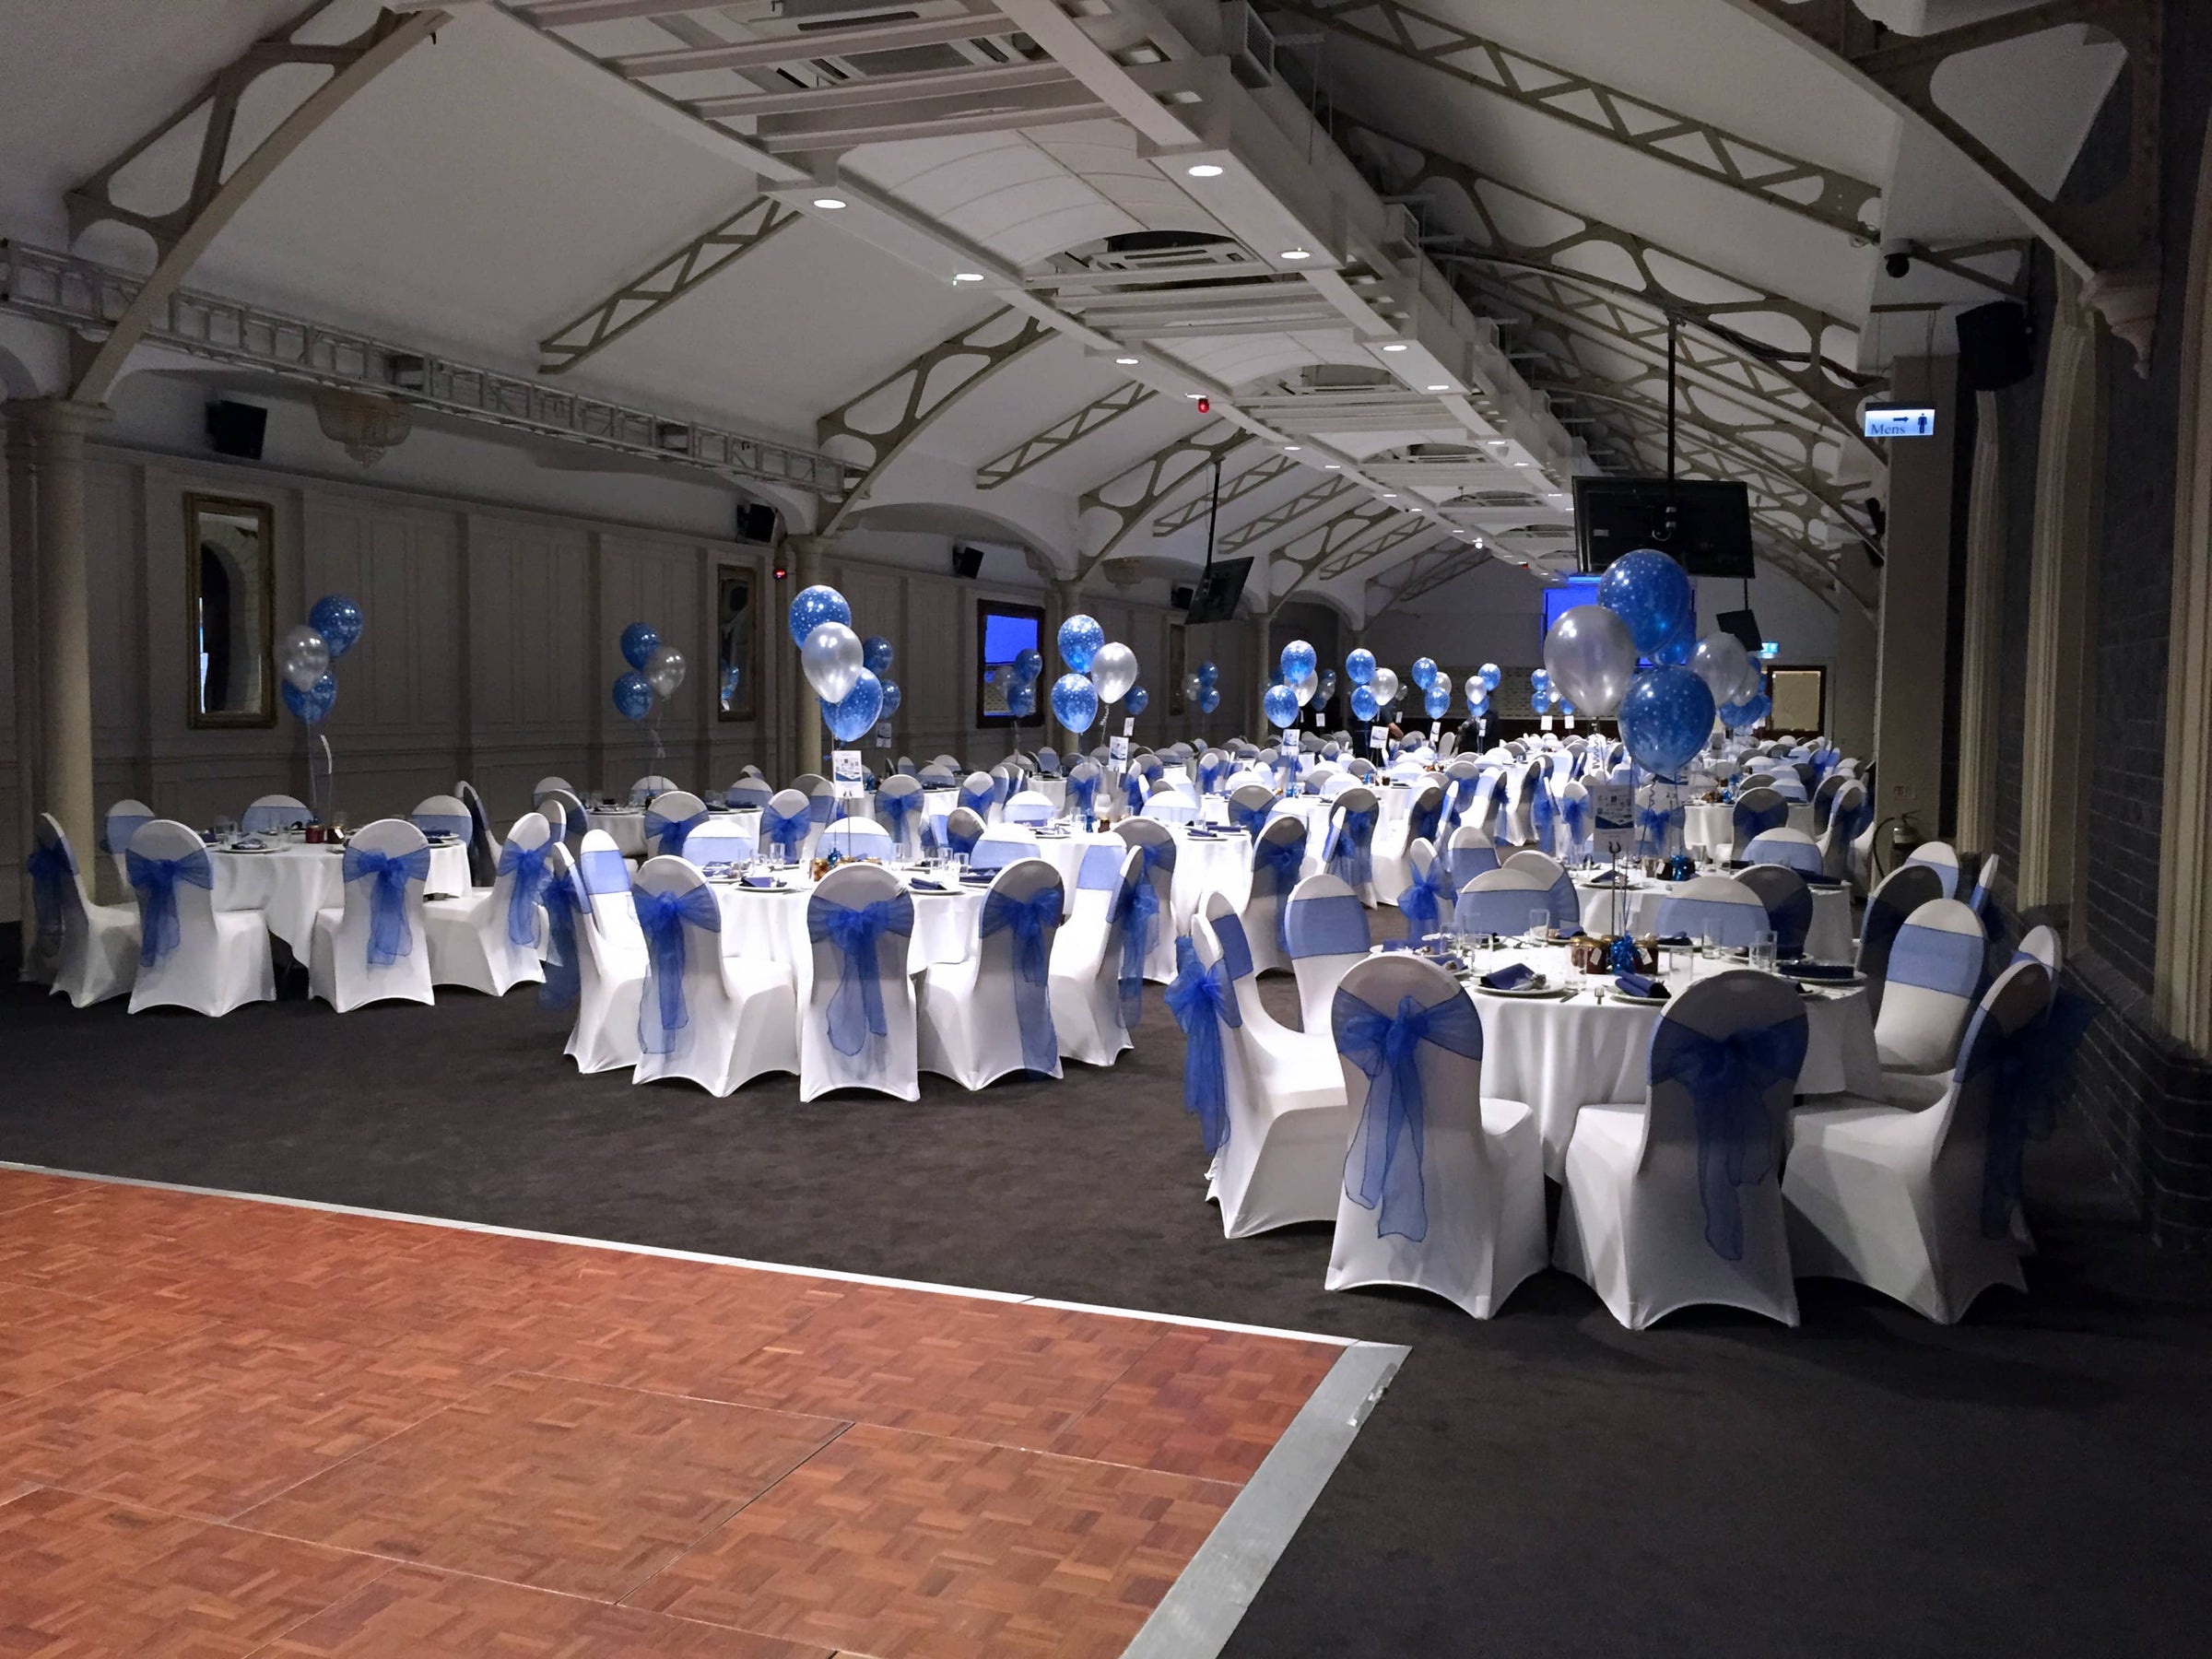 Professional Balloon Decorators Wolverhampton. Photo of venue decorated with balloon bouquets on tables. 